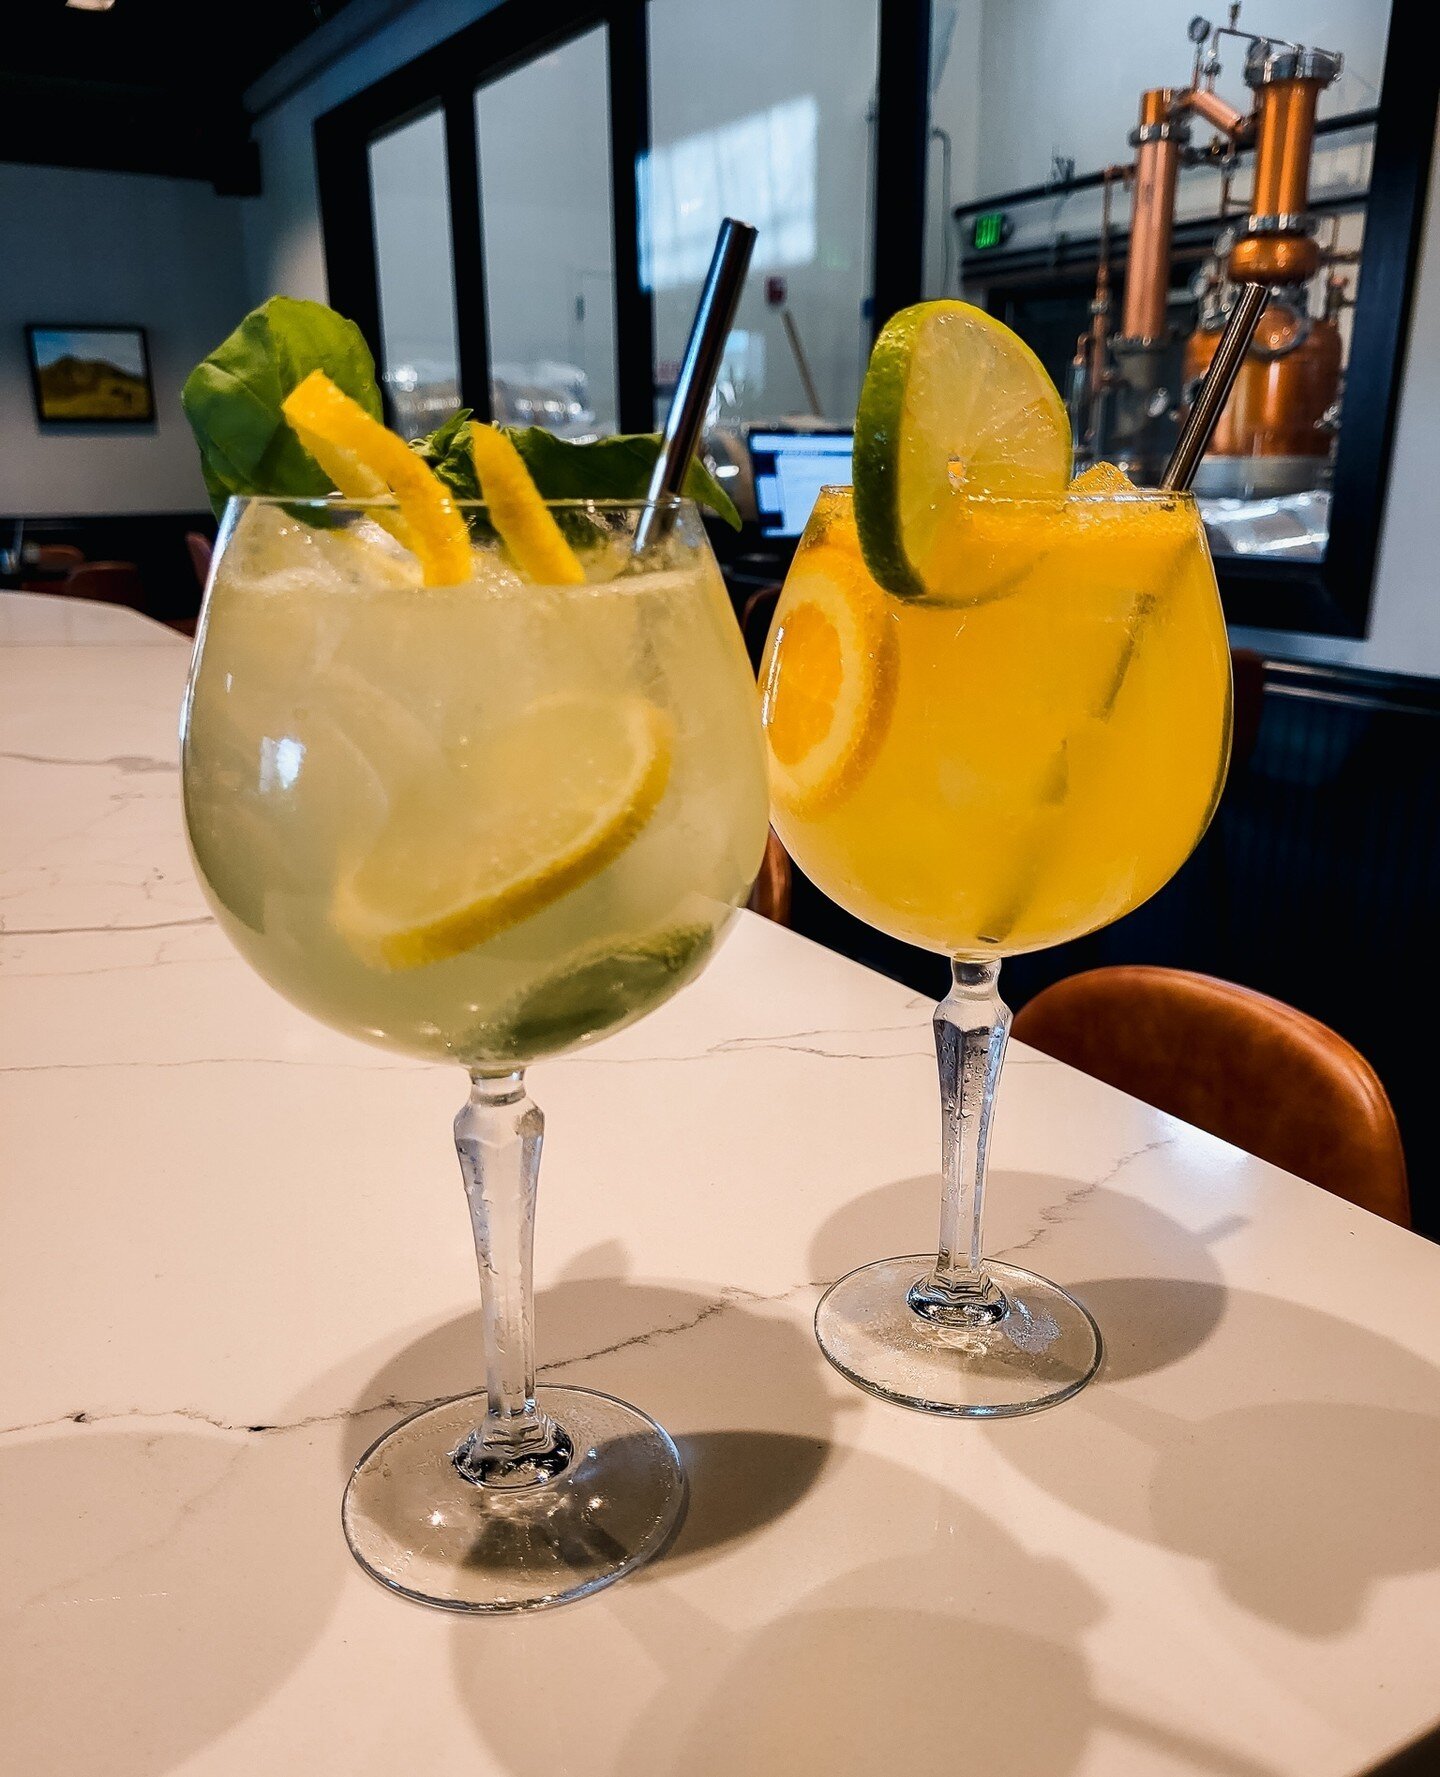 What a handsome couple! Our Floral and Tropical Gin &amp; Tonics are a great pair.⁠
⁠
Open today 5pm-10pm.